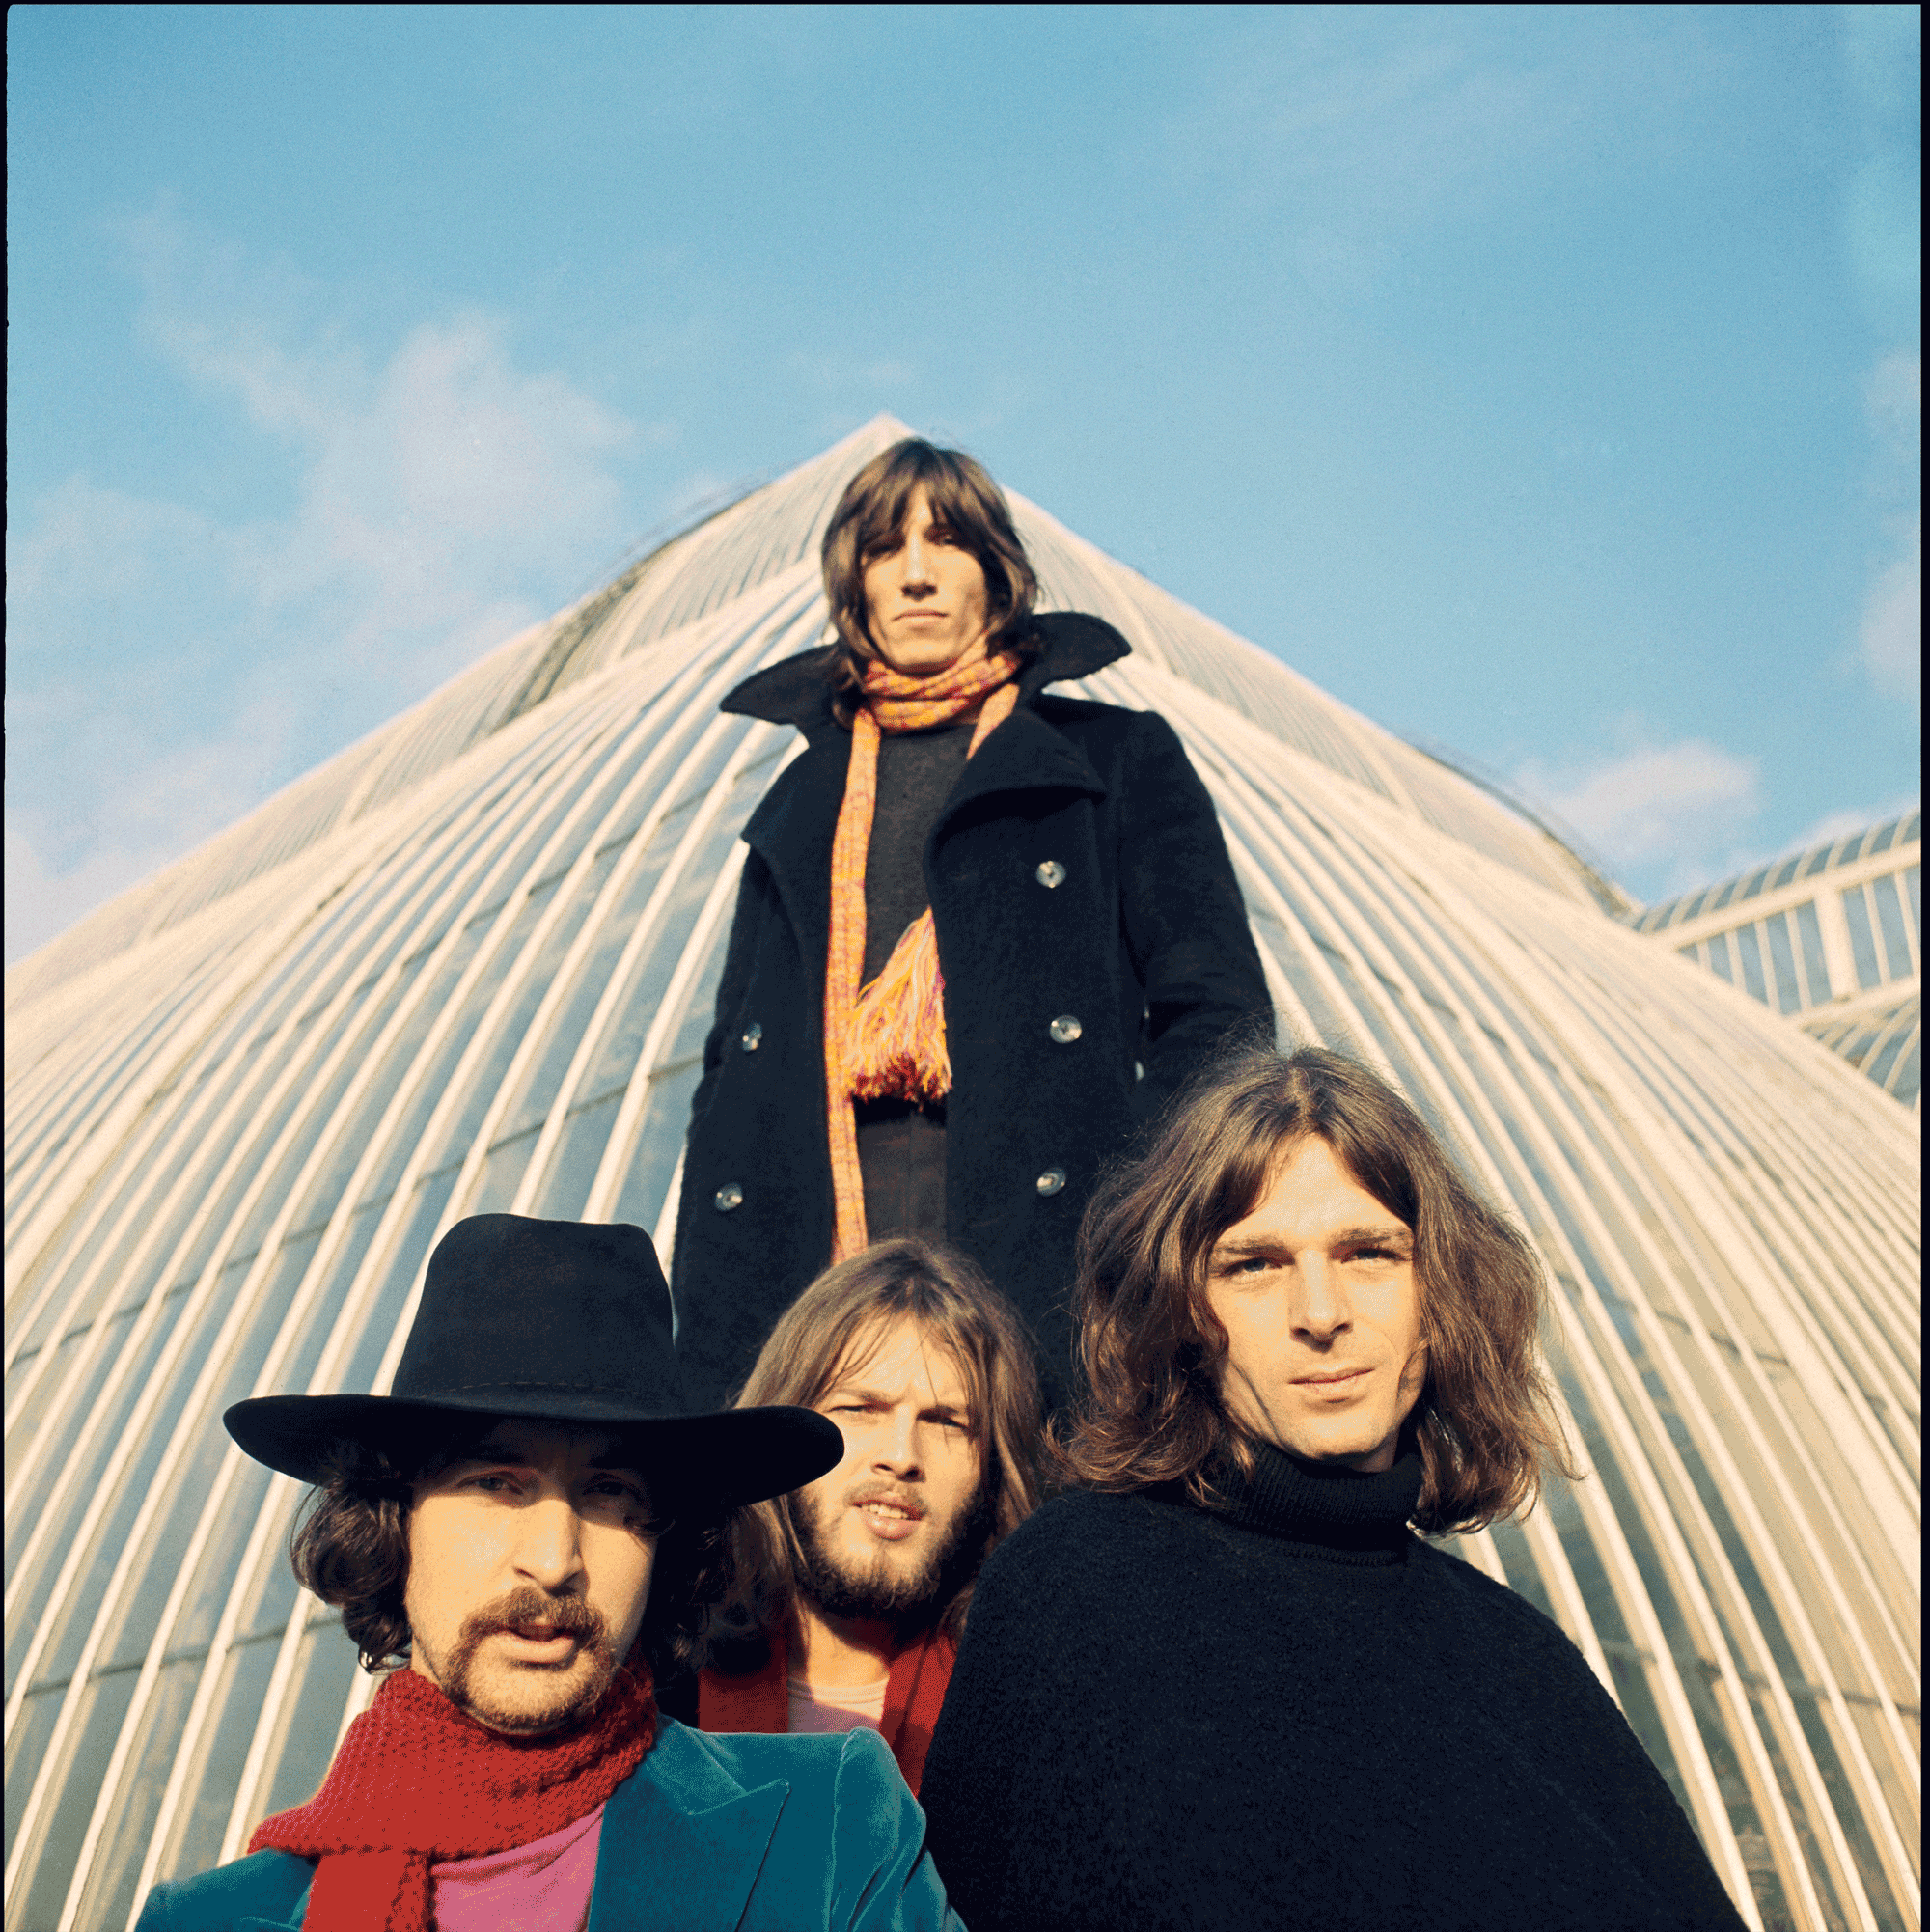 Pink Floyd High Quality Background on Wallpapers Vista